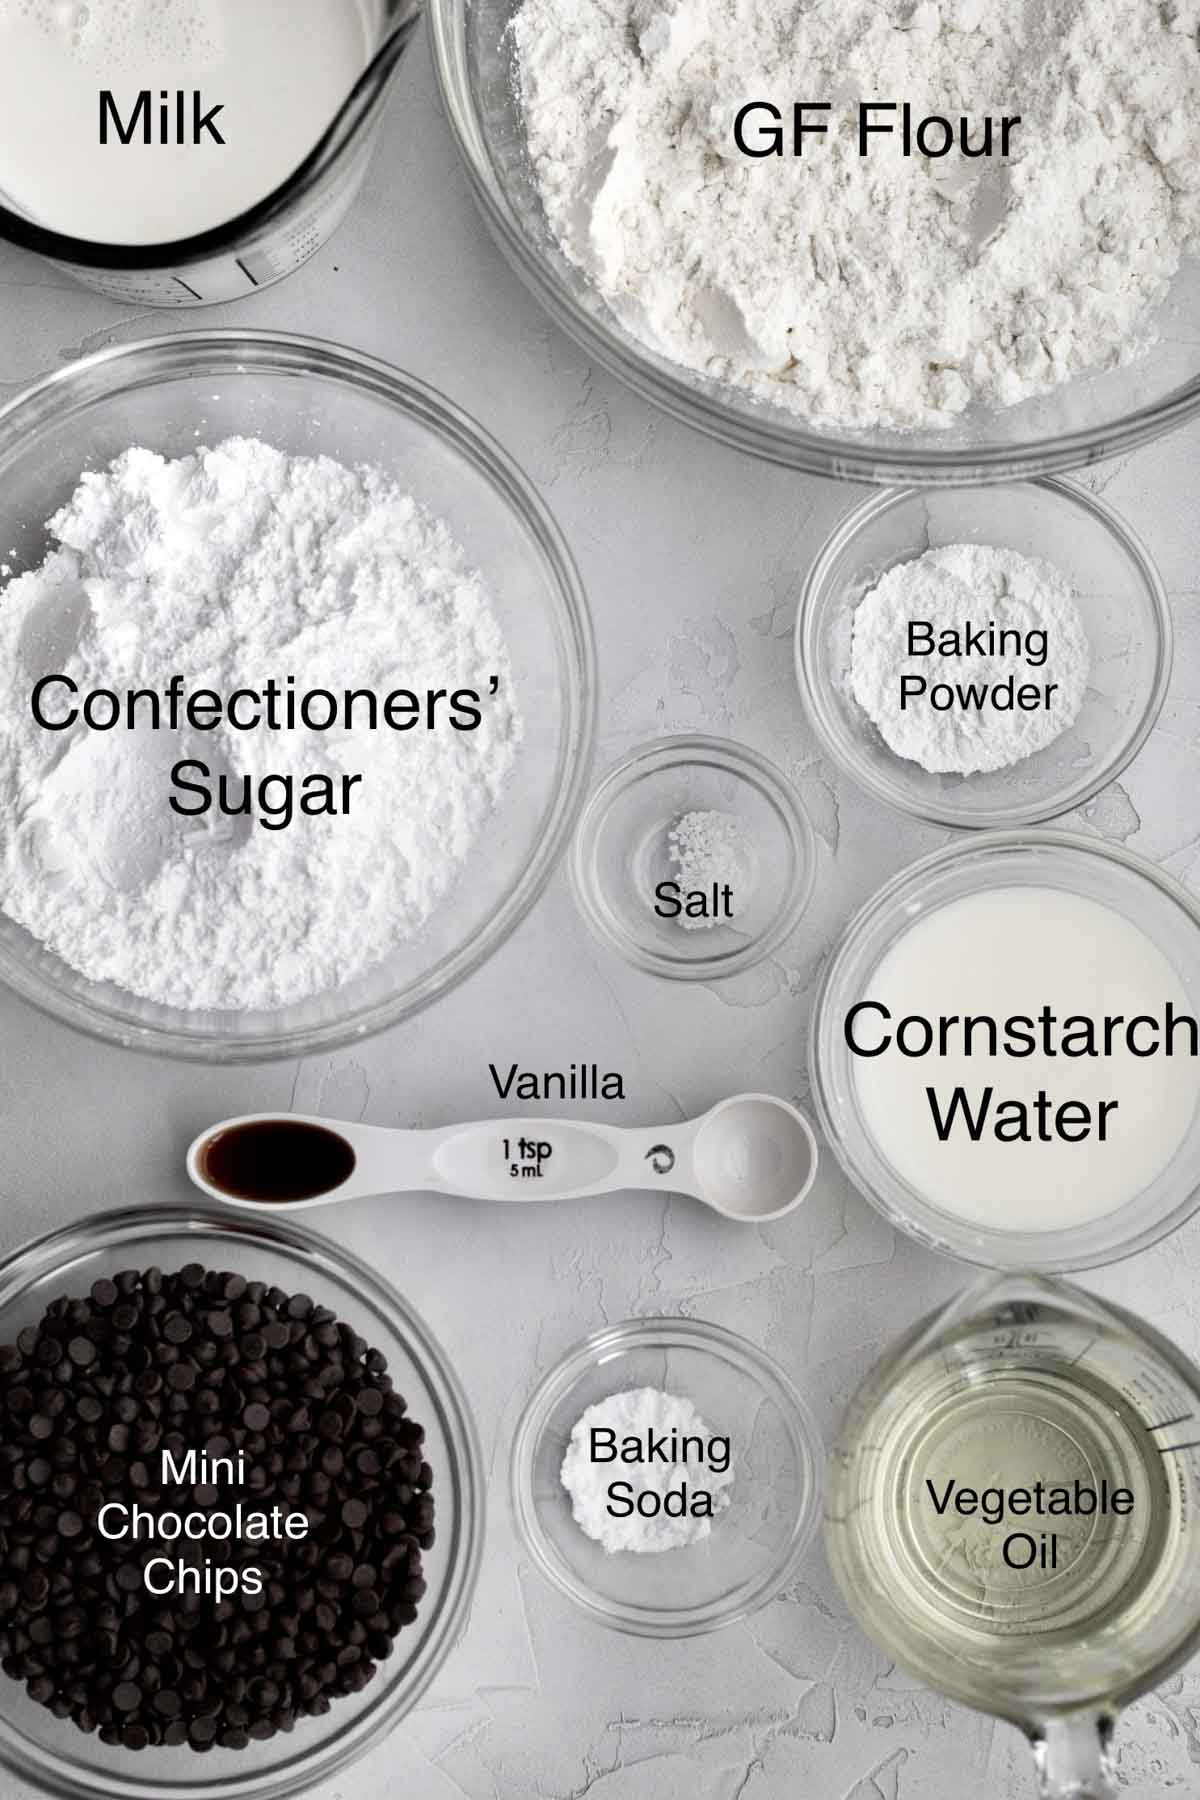 The ingredients for the cupcakes with their text names over it.